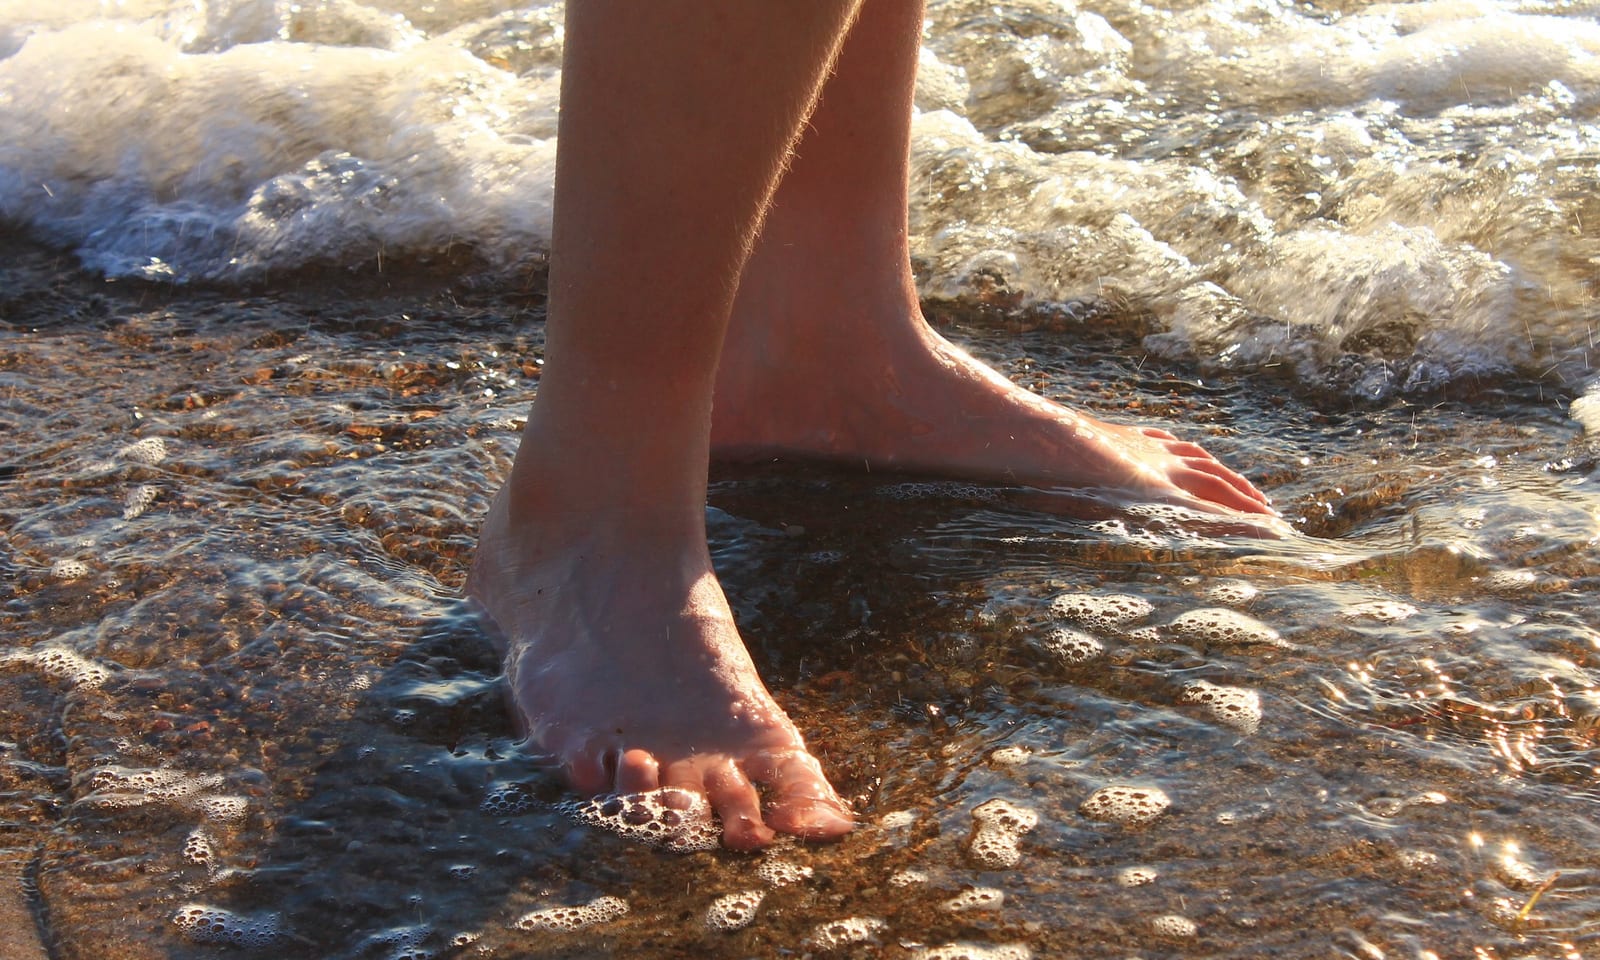 does having flat feet affect your balance